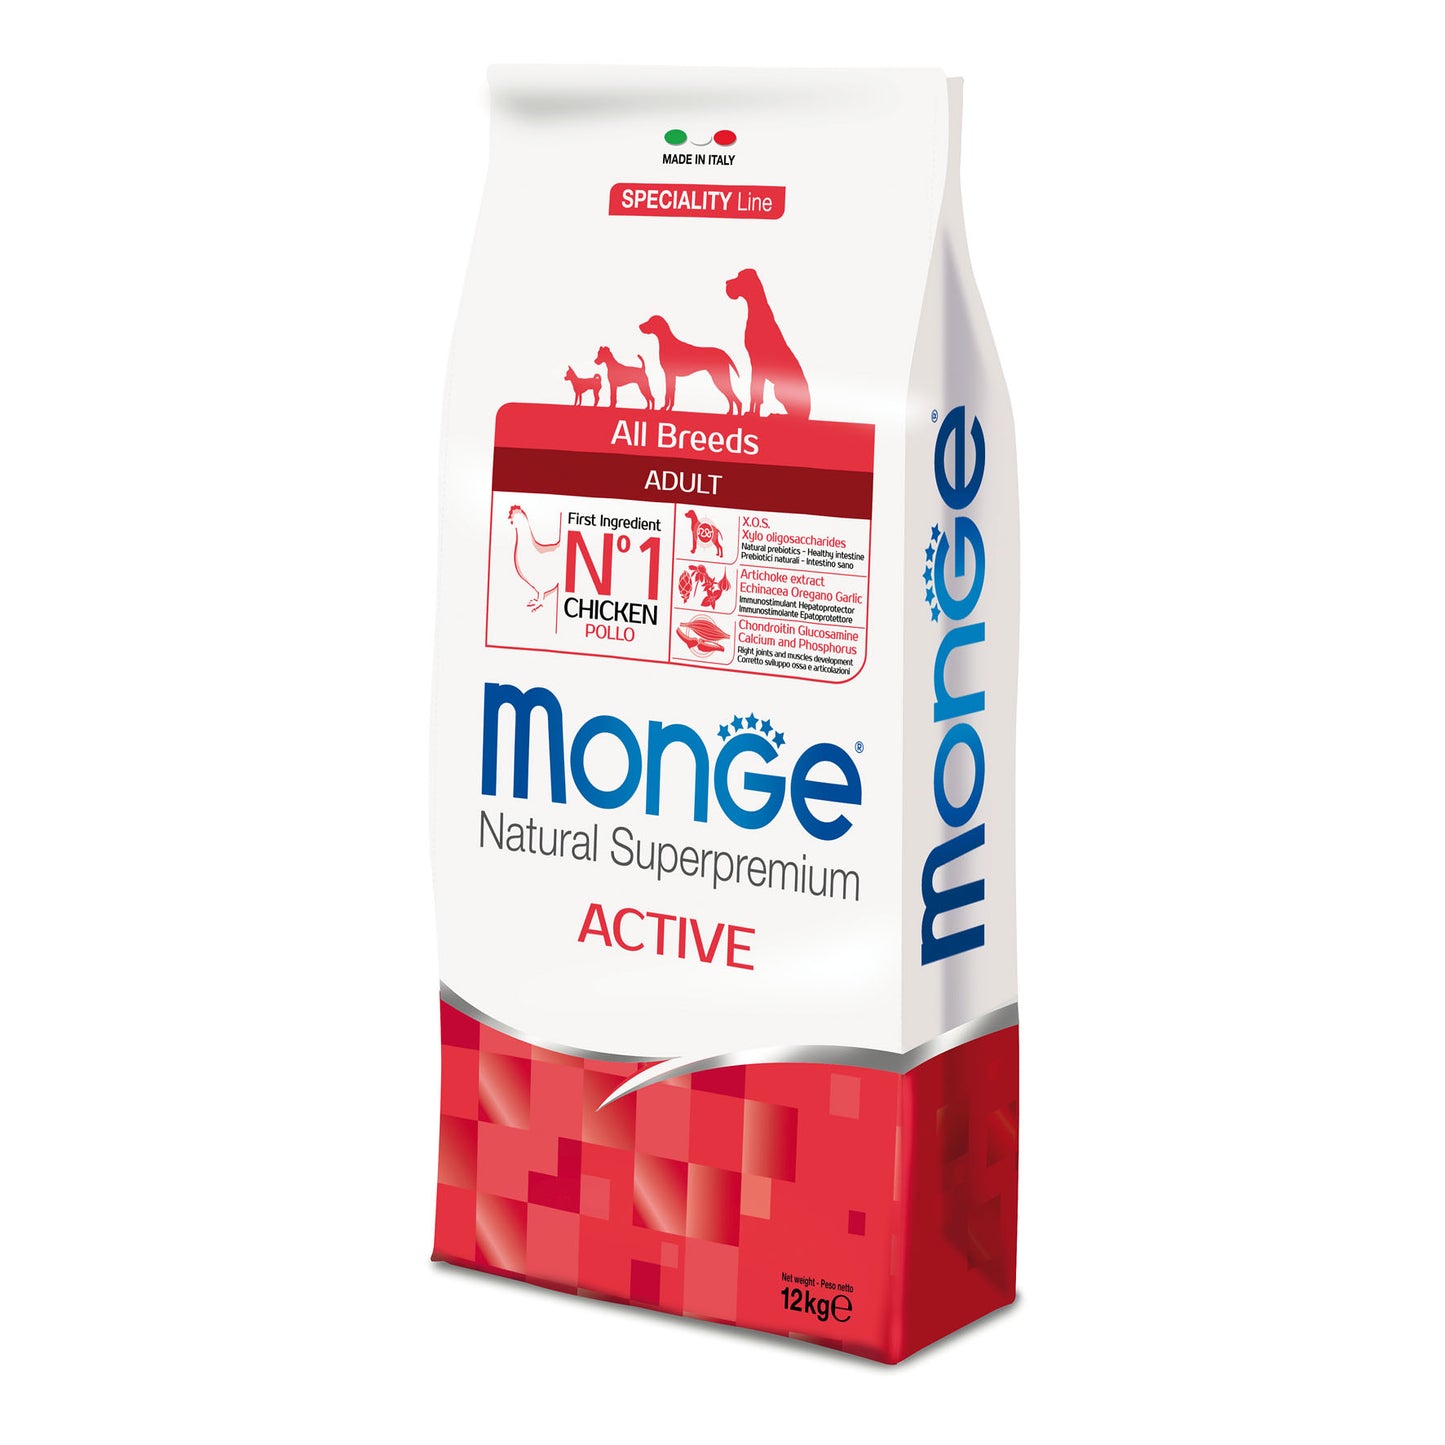 Monge Dog - SPECIALITY Line - Monoprotein - Adult ALL BREEDS  Active Chicken